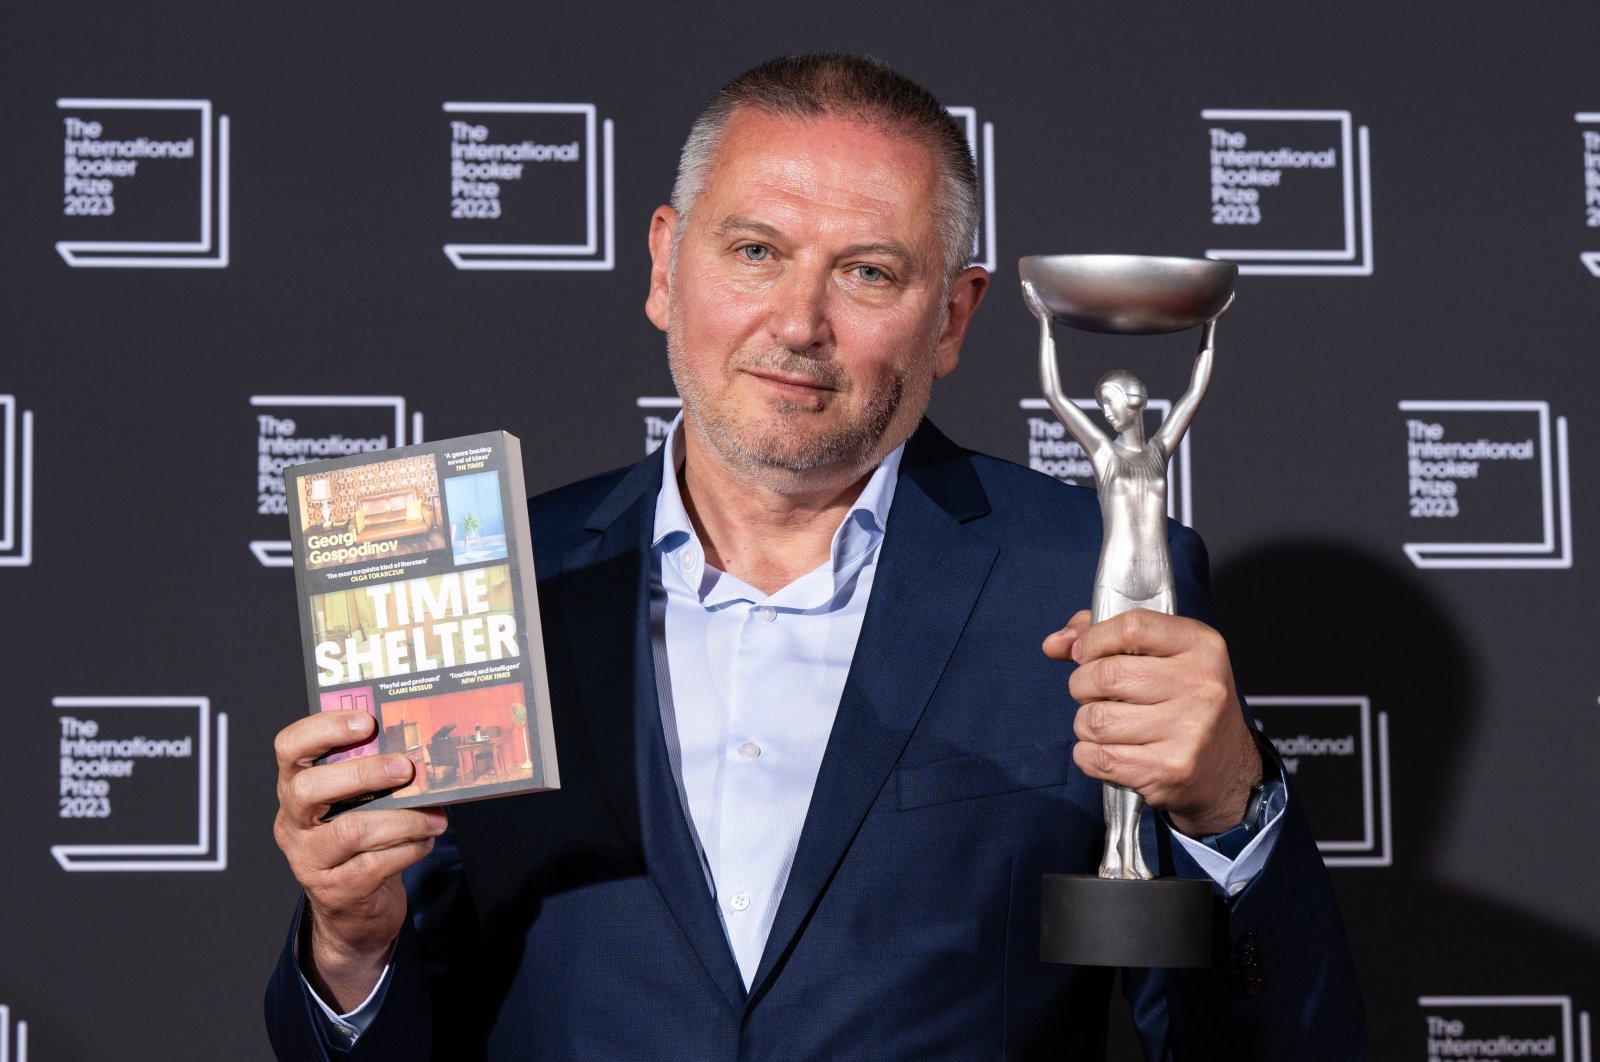 Author Georgi Gospodinov is announced as the winner of &quot;The International Booker Prize 2023&quot; at Sky Garden, London, U.K., May 23, 2023. (Getty Images Photo)